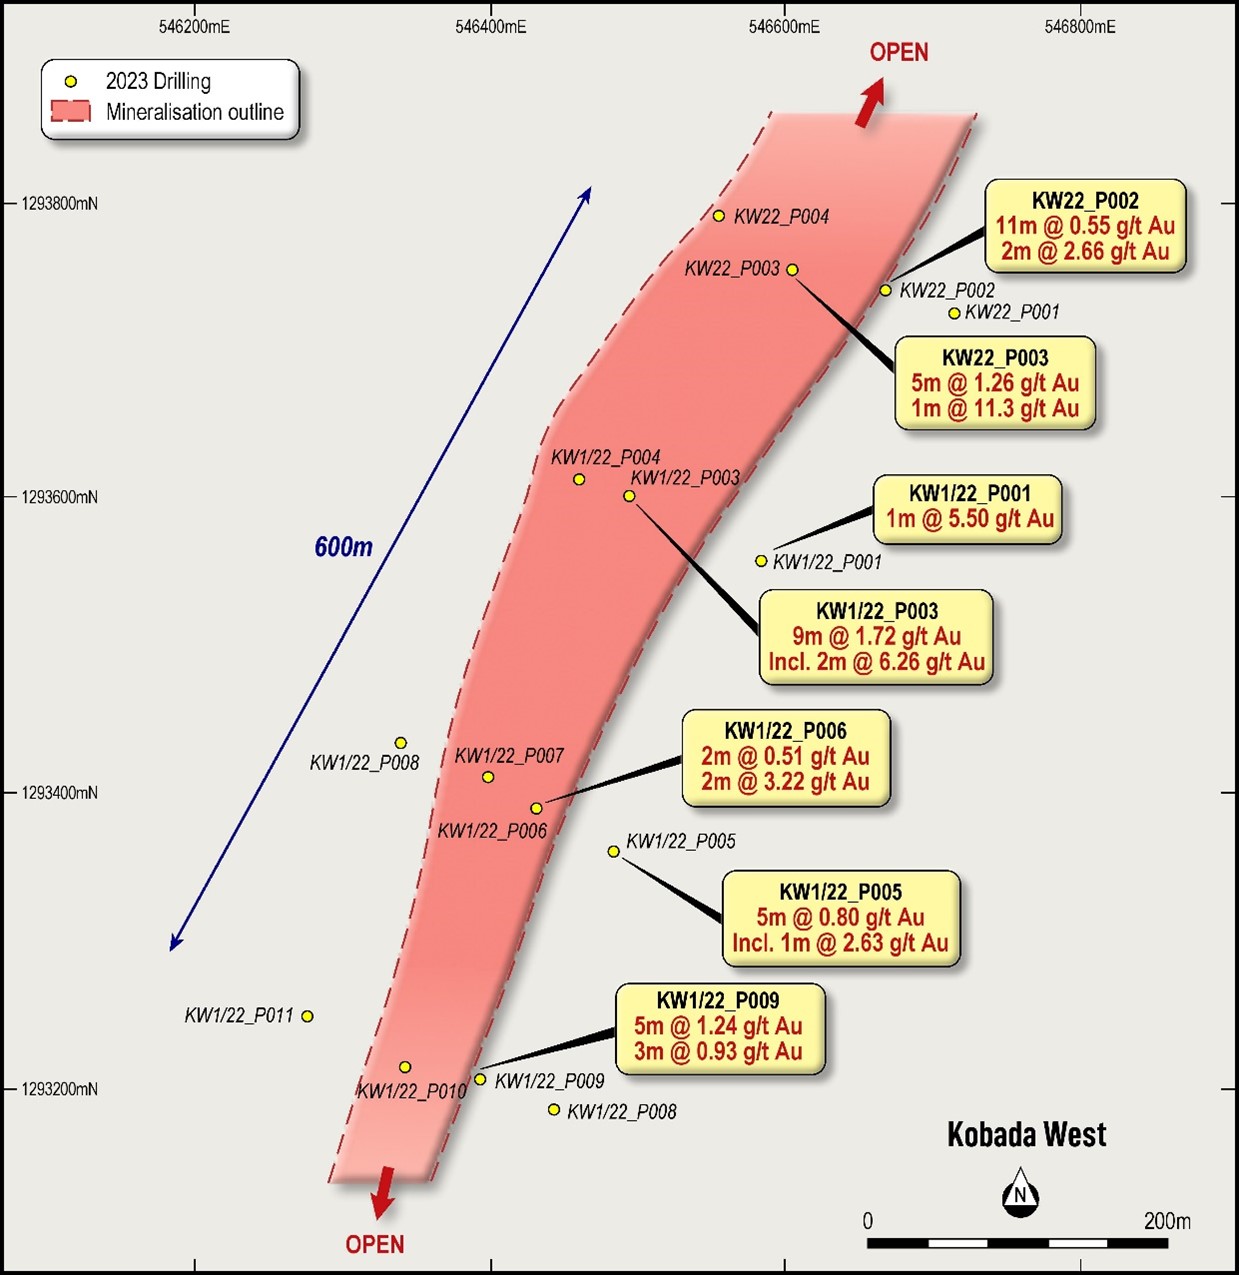 Plan showing Kobada West RC drilling locations and results